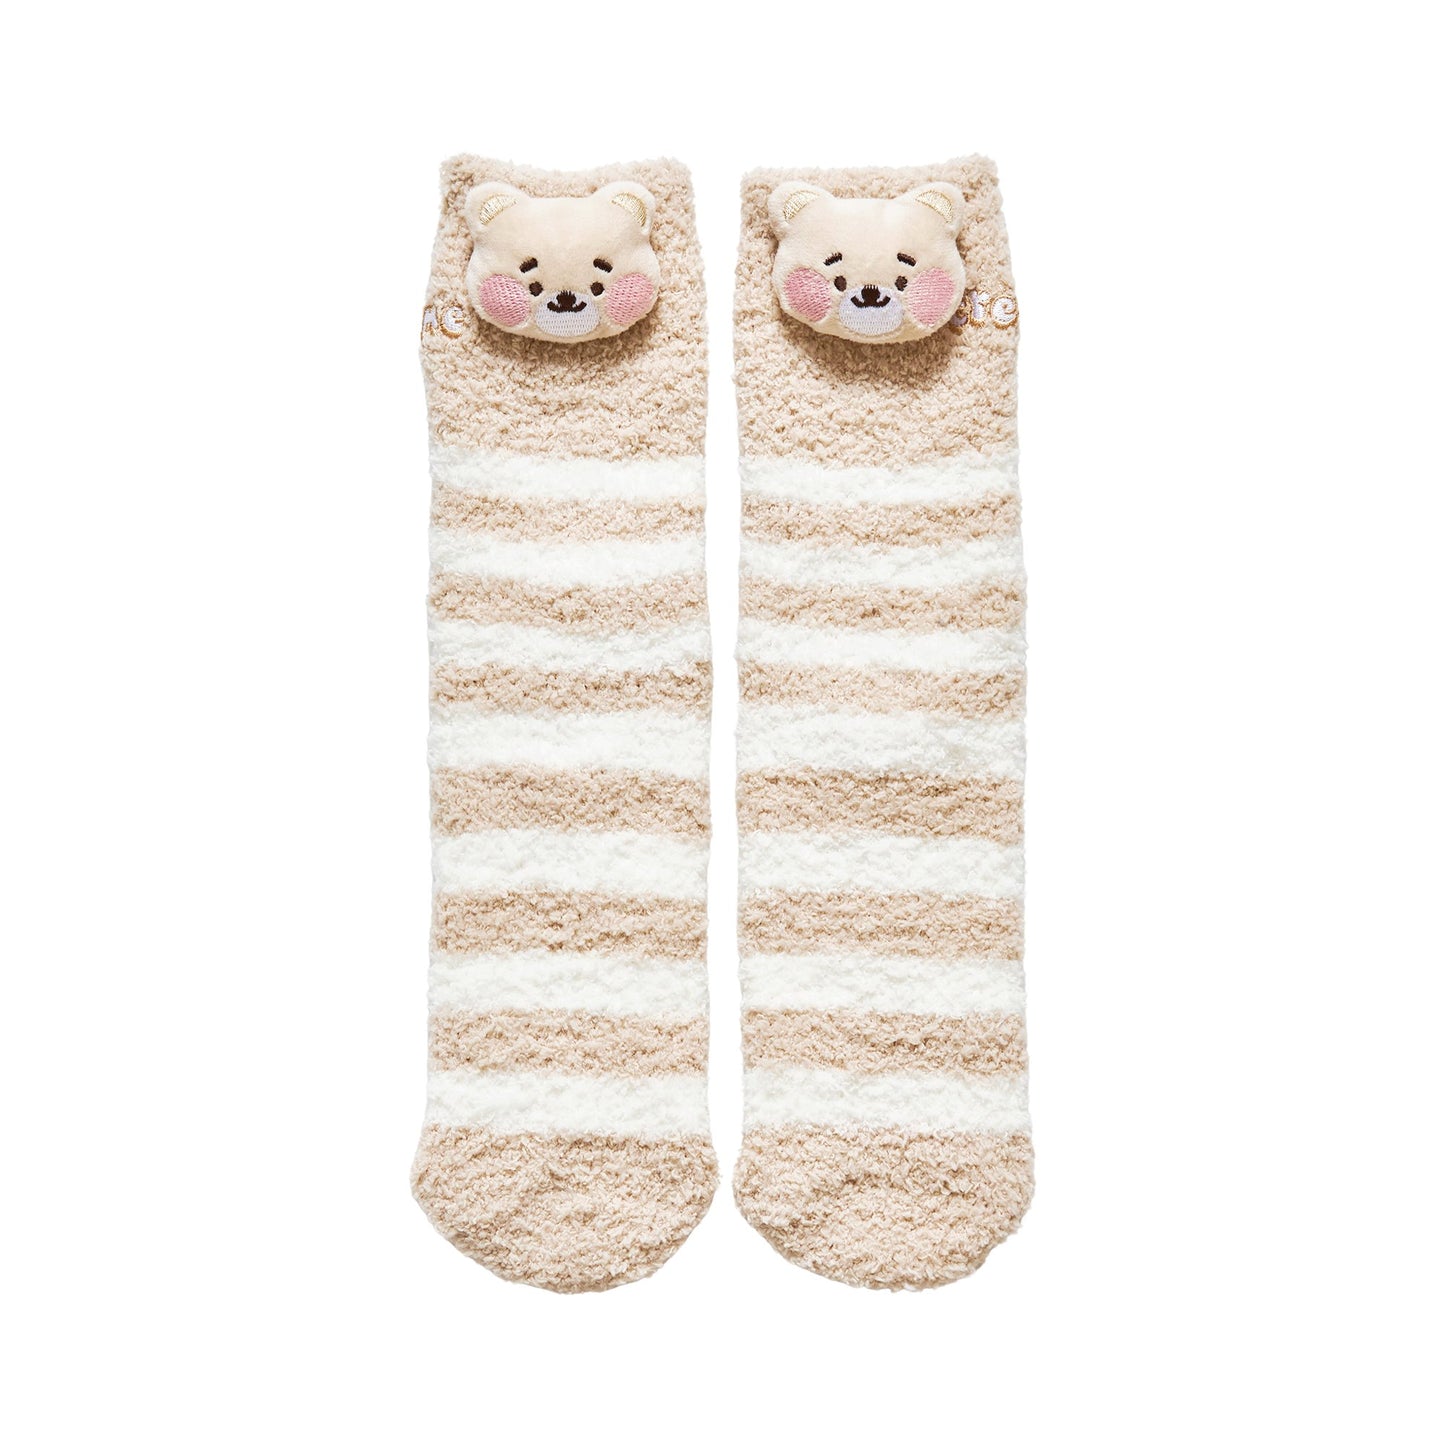 Beary Merry Holiday Infused Cozy Socks | The Crème Shop